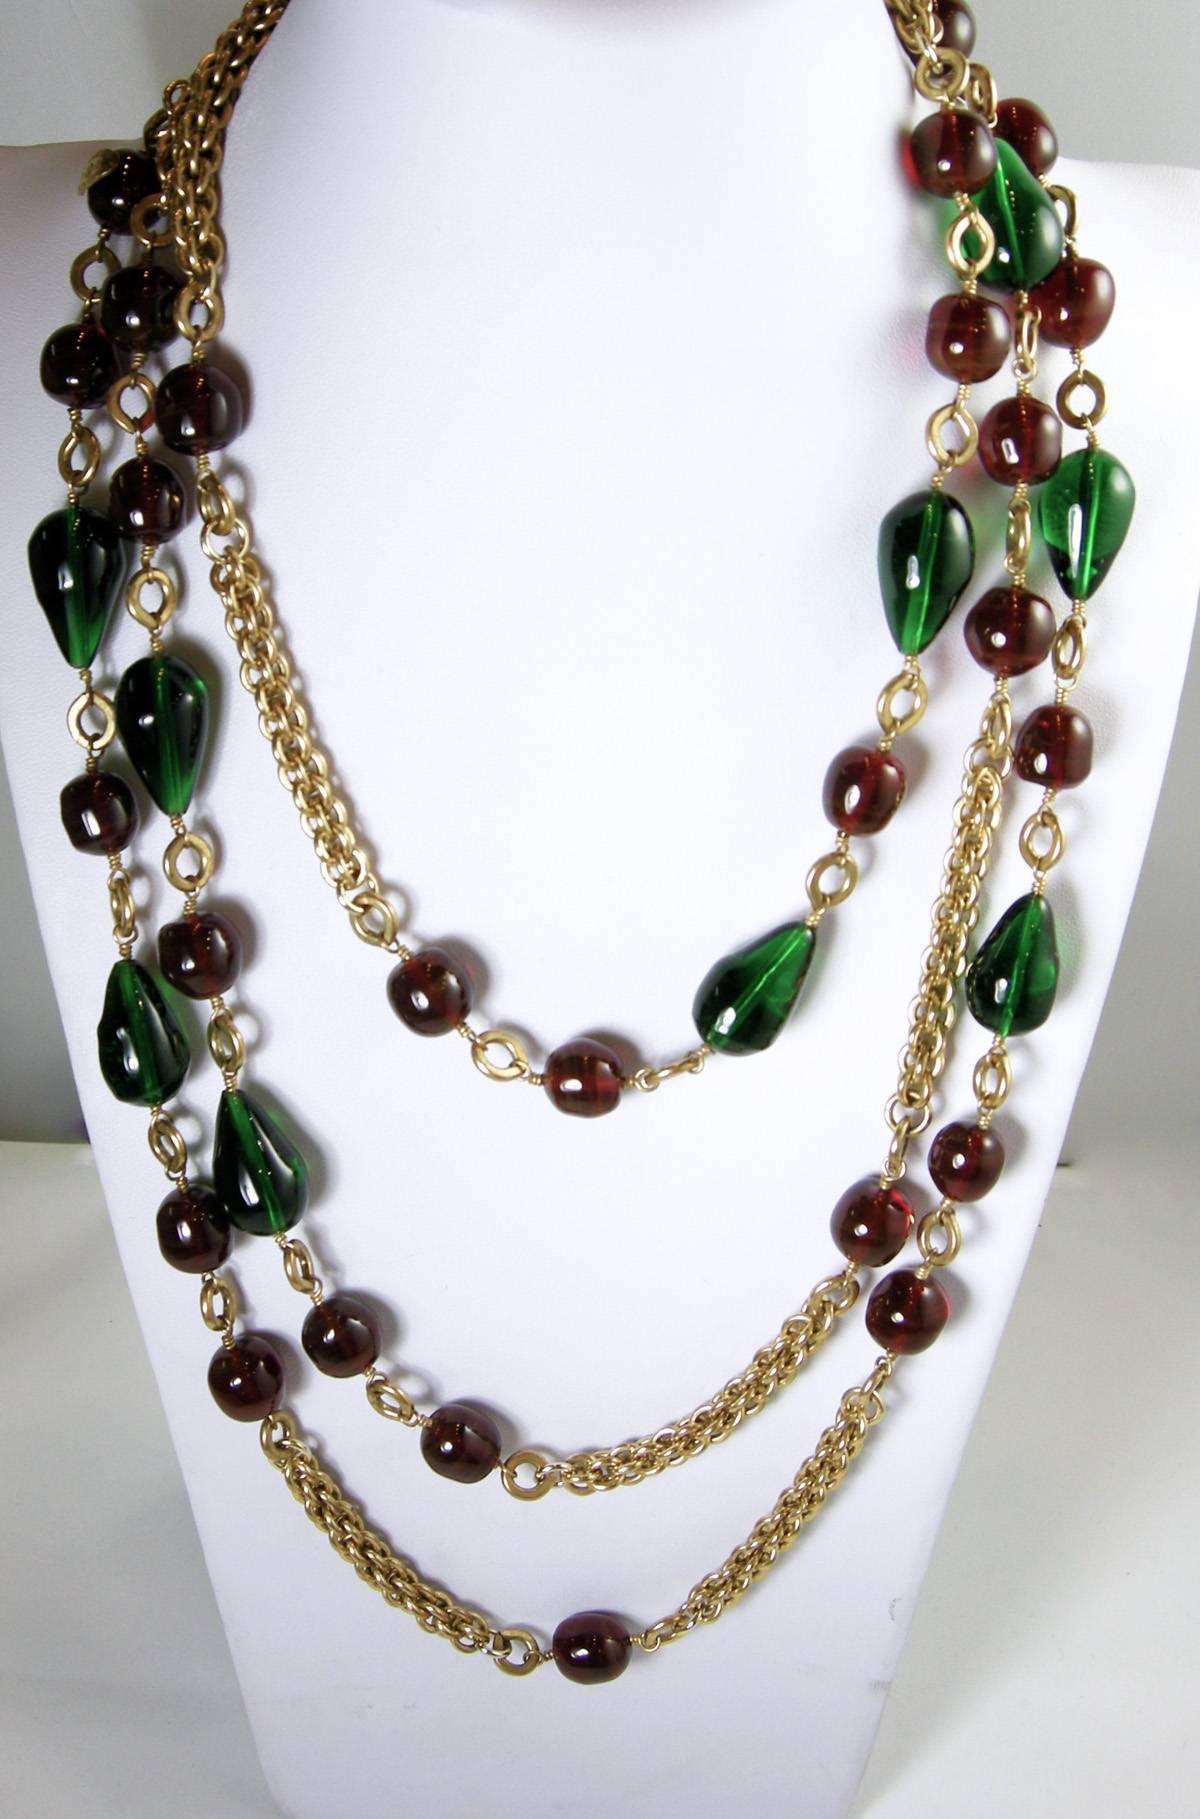 Wow, this is just a stunning Chanel necklace with cranberry and emerald color Gripoix glass in a gold-tone setting. This Gripoix glass necklace measures 71” x 1/2” with a spring closure and is signed “Chanel Made in France” and “23, which means